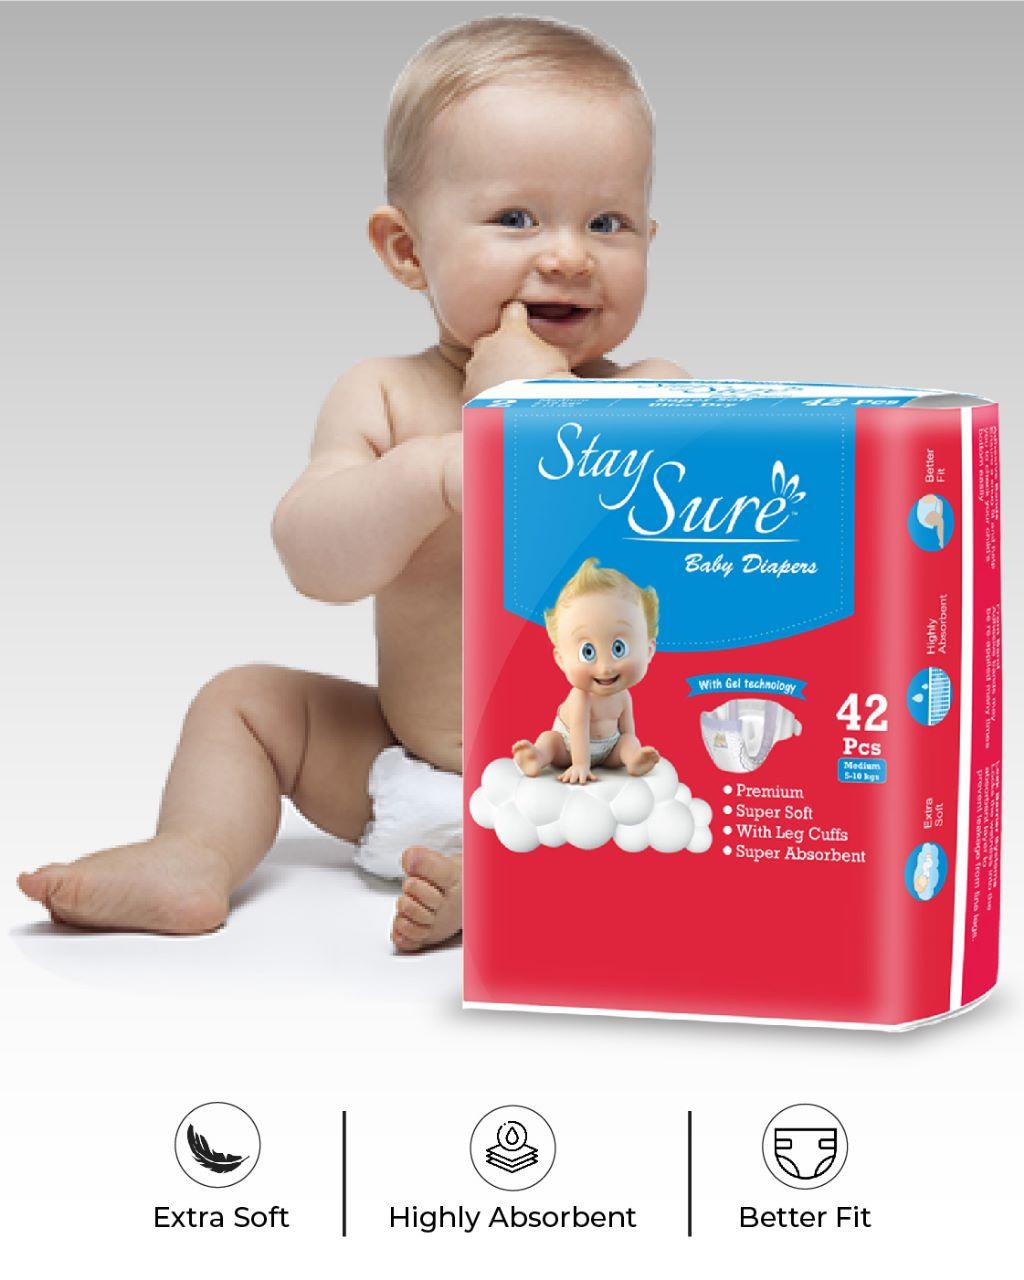 Stay Sure Baby Diaper Sticking type Medium - PACK OF 42Pcs - staysure.asia